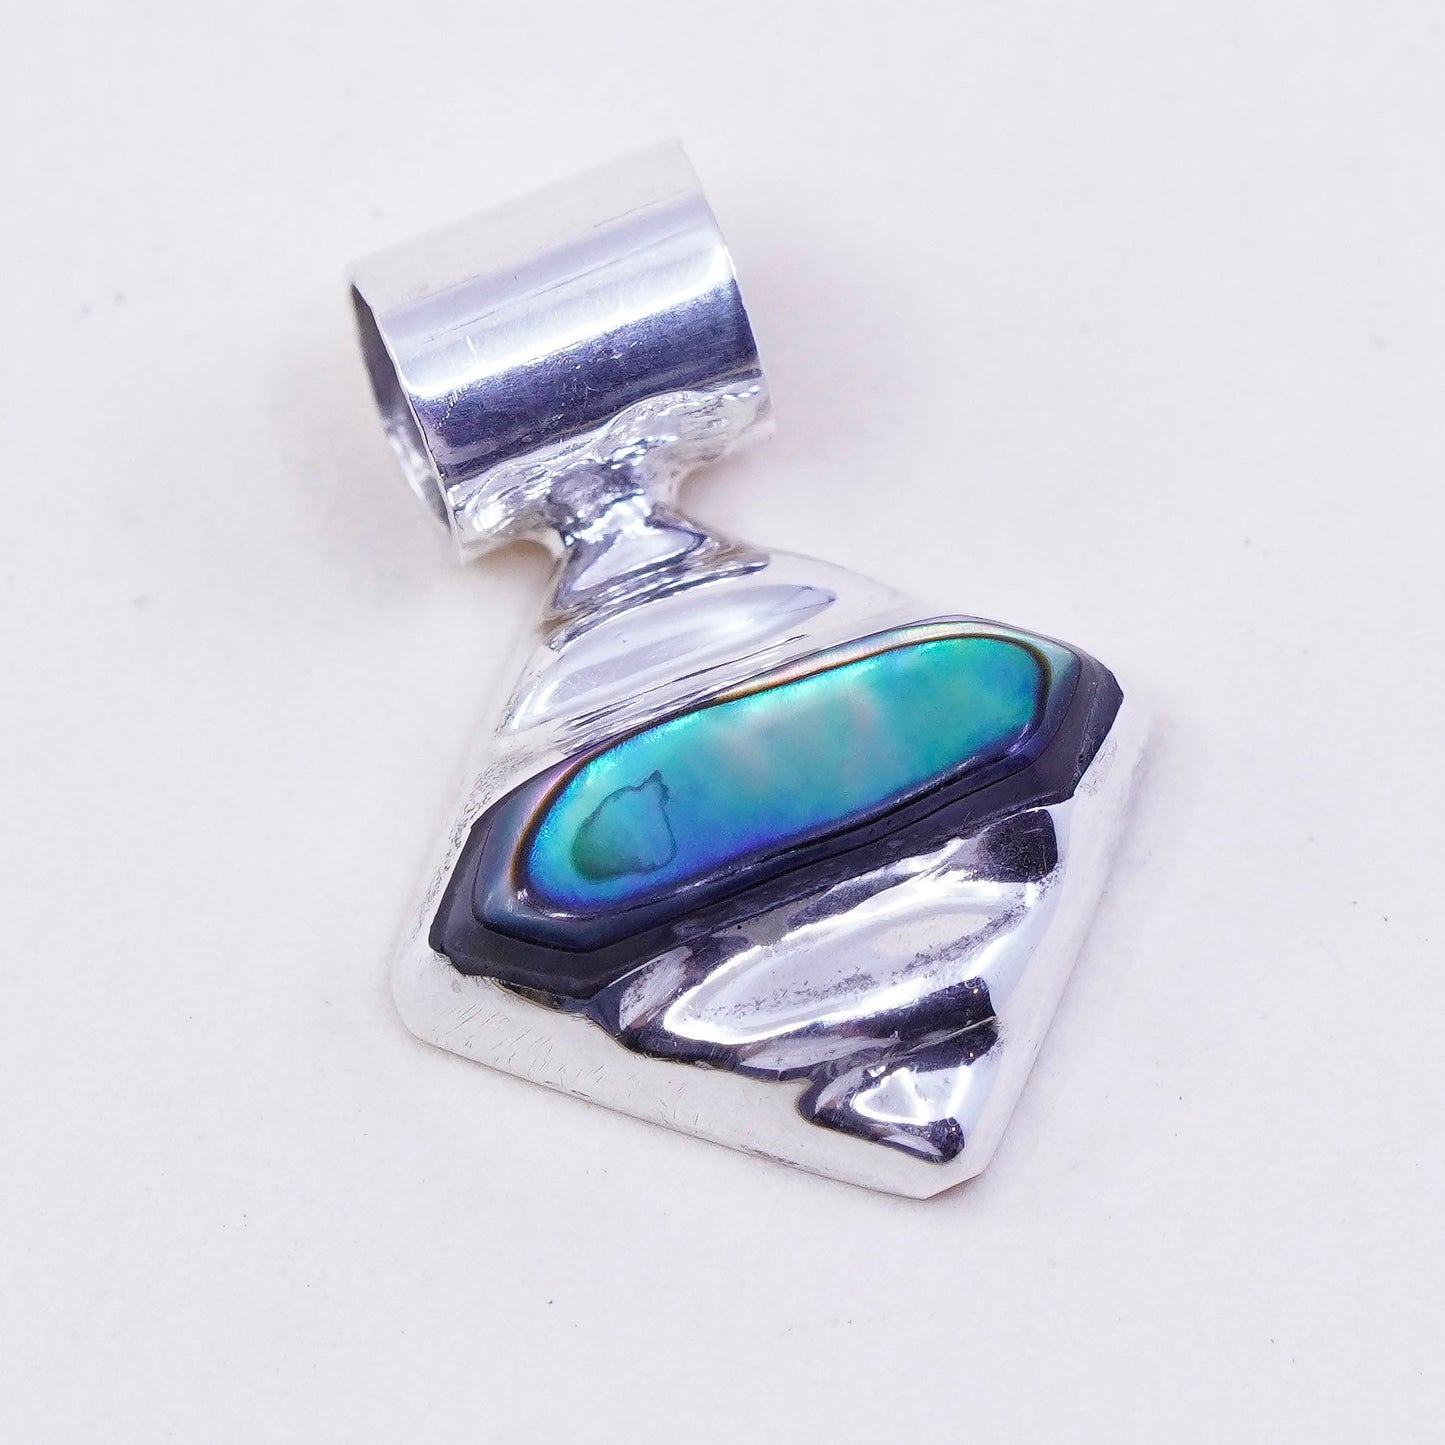 Vintage sterling silver handmade pendant, mexico 925 with abalone